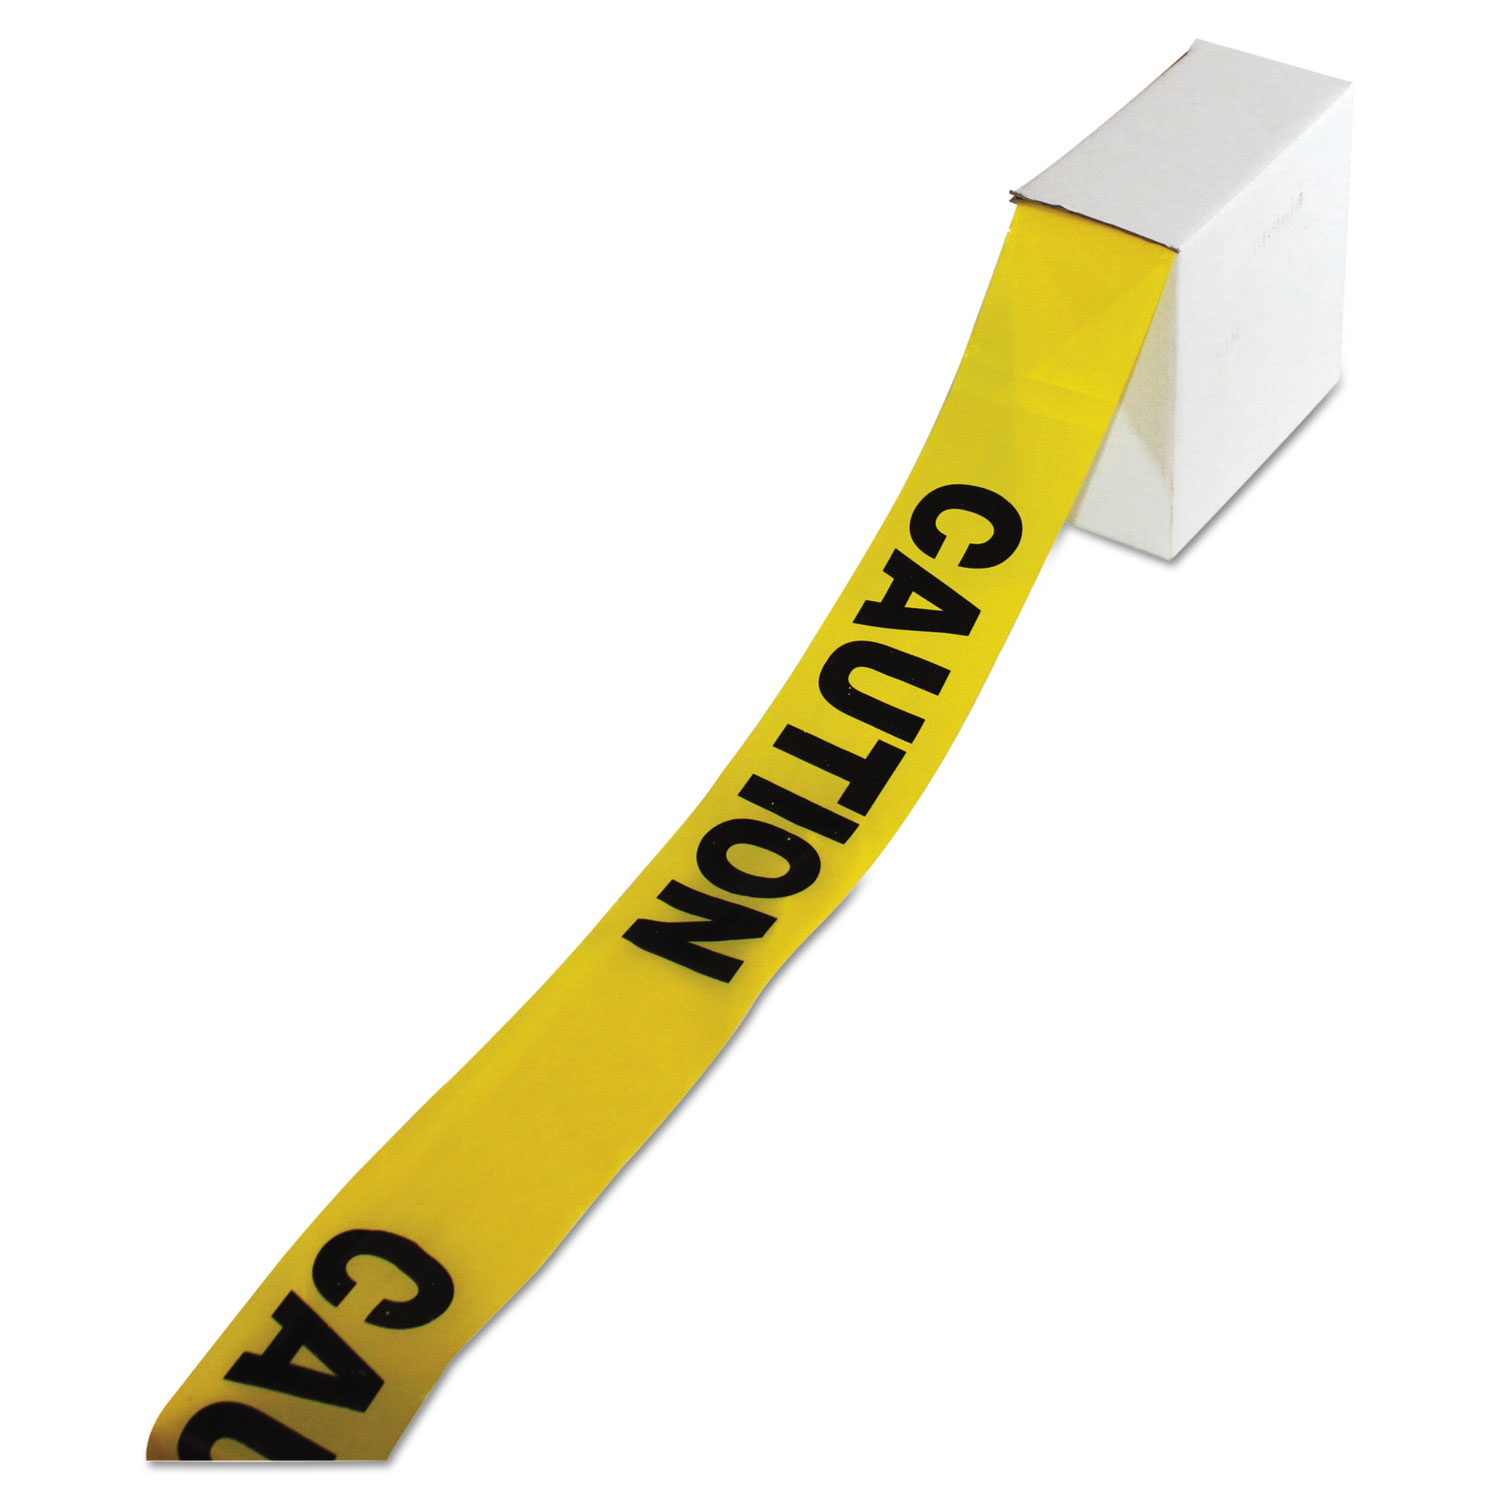  Impact IMP 7328 Site Safety Barrier Tape, Caution Text, 3 x 1000ft, Yellow/Black (IMP7328) 